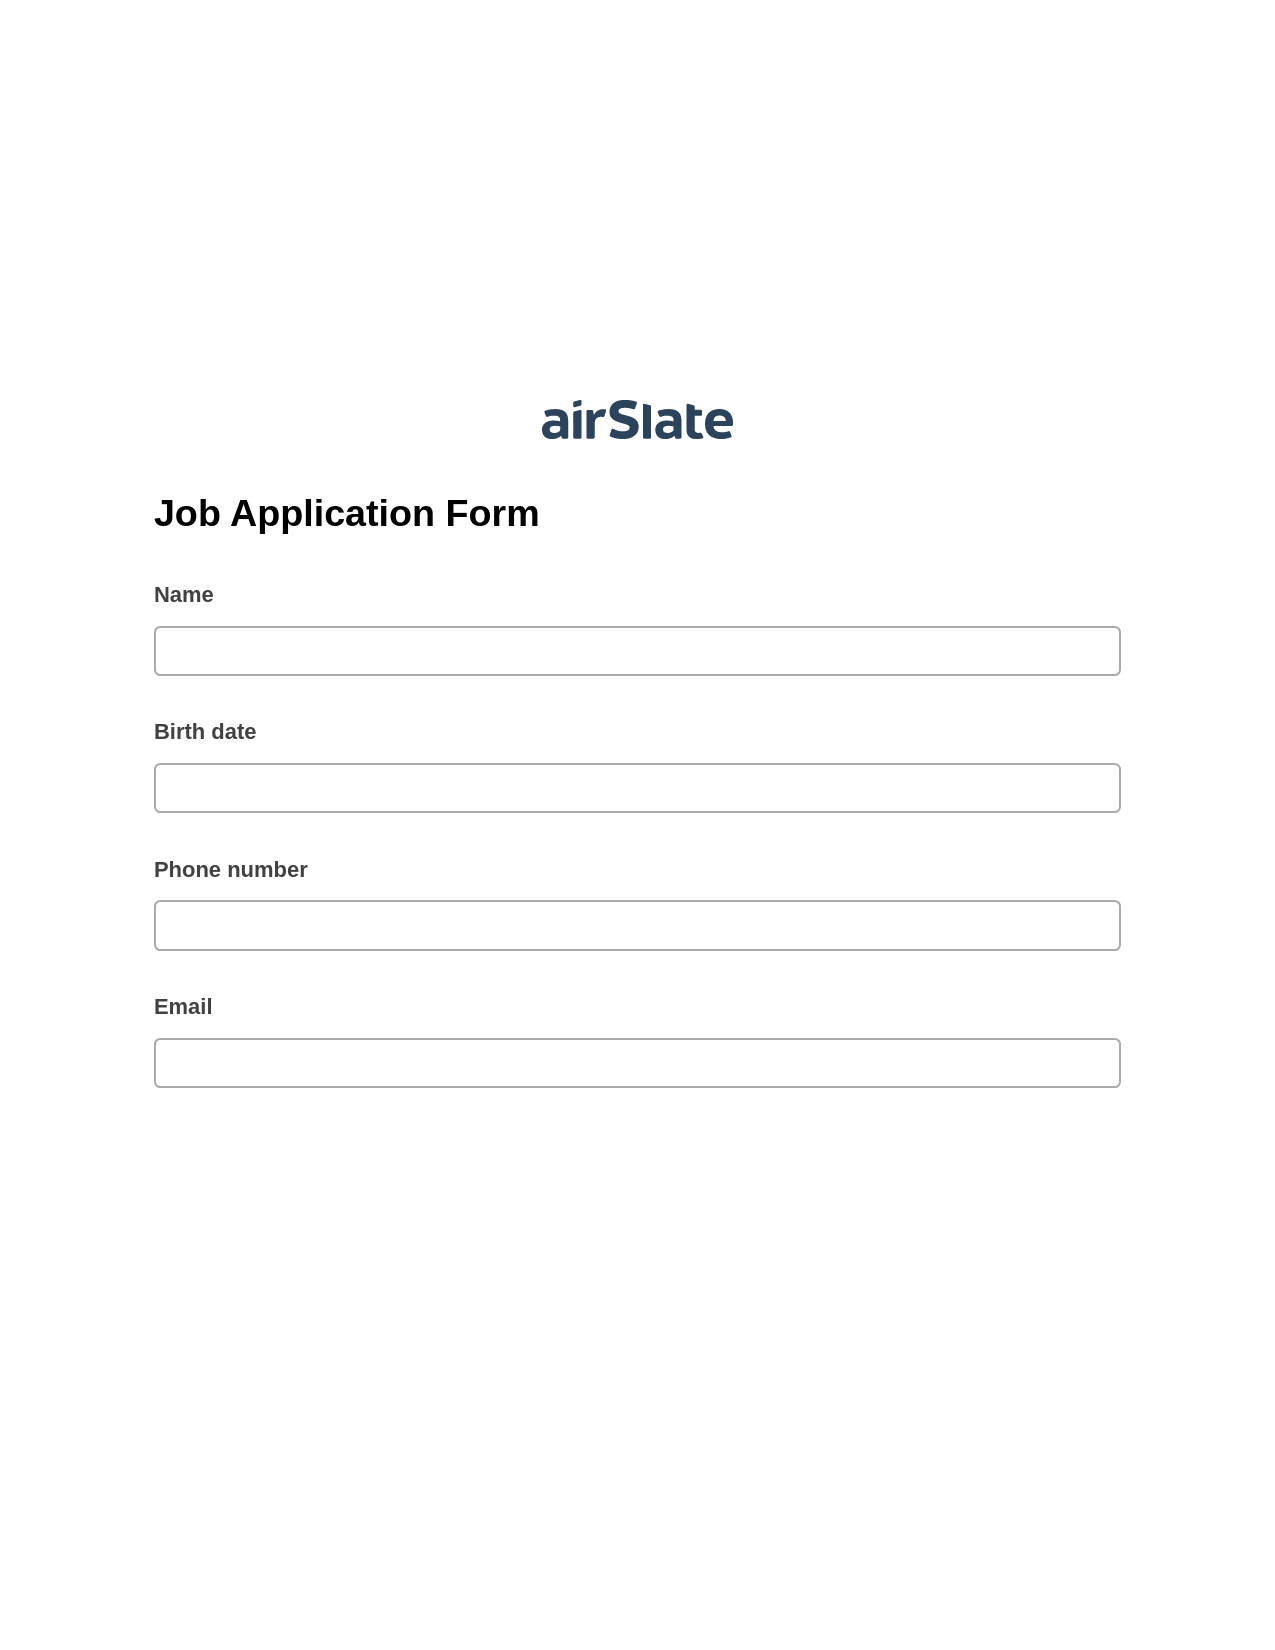 Multirole Job Application Form Pre-fill Dropdowns from Office 365 Excel Bot, Export to MS Dynamics 365 Bot, Export to Salesforce Bot